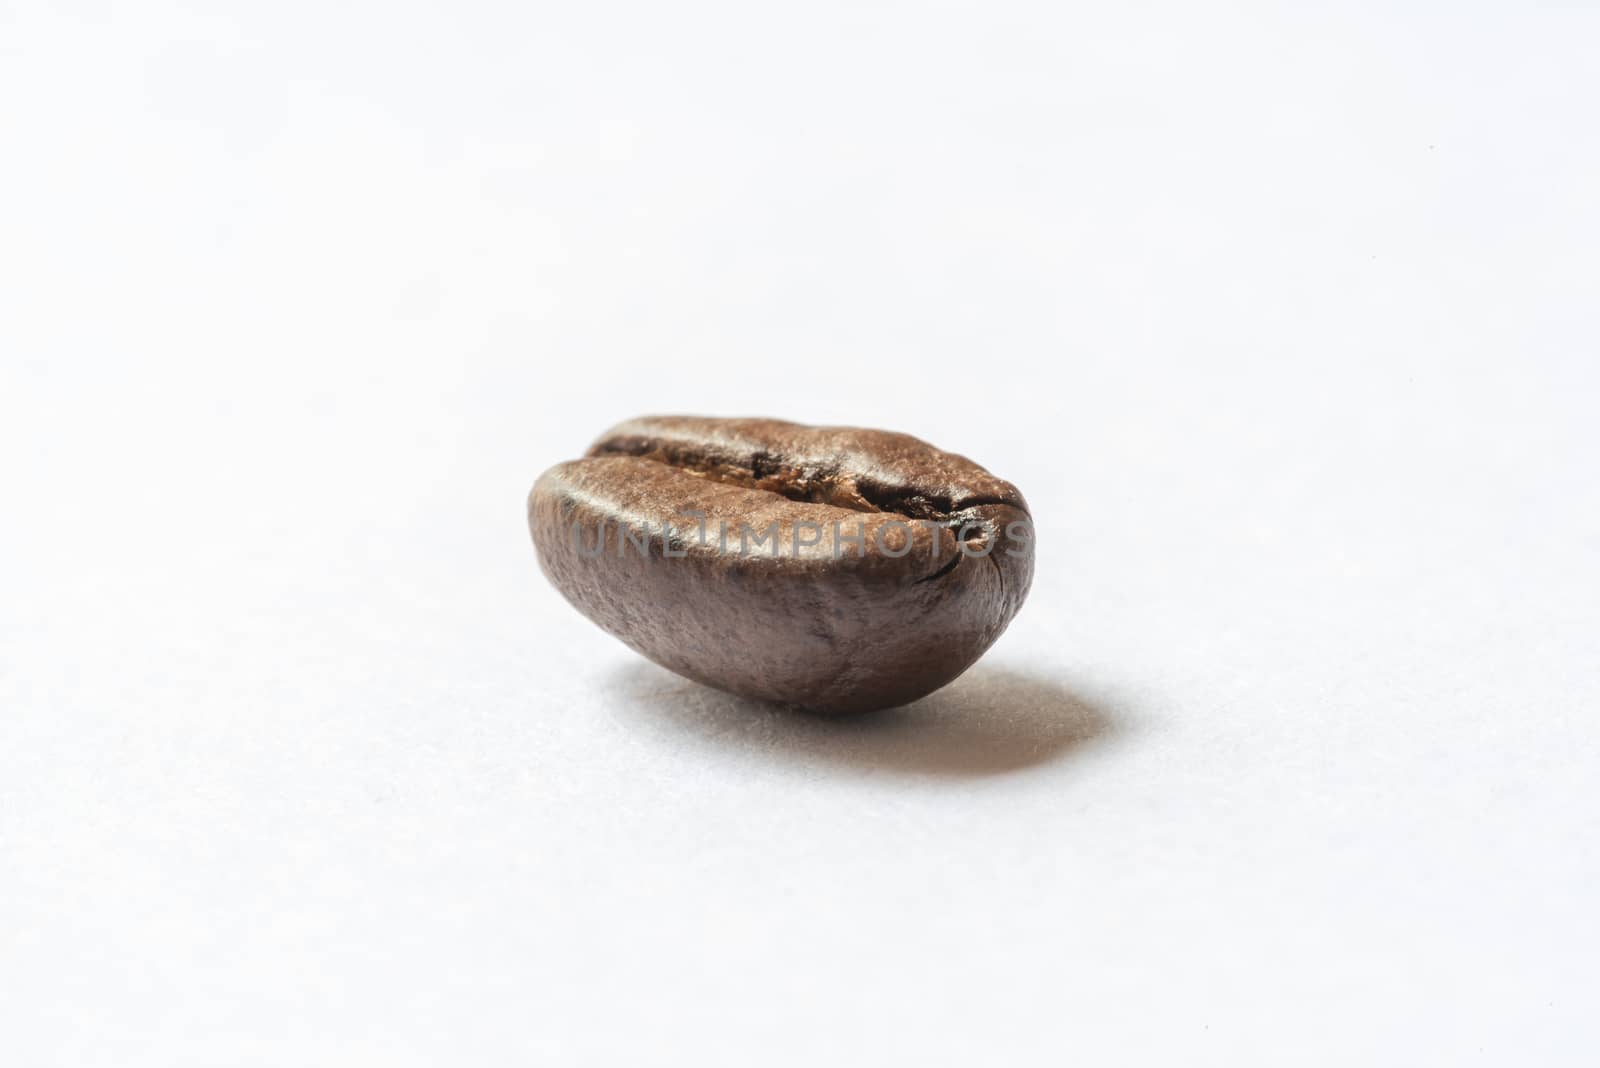 Roasted coffee bean isolated on white close-up view